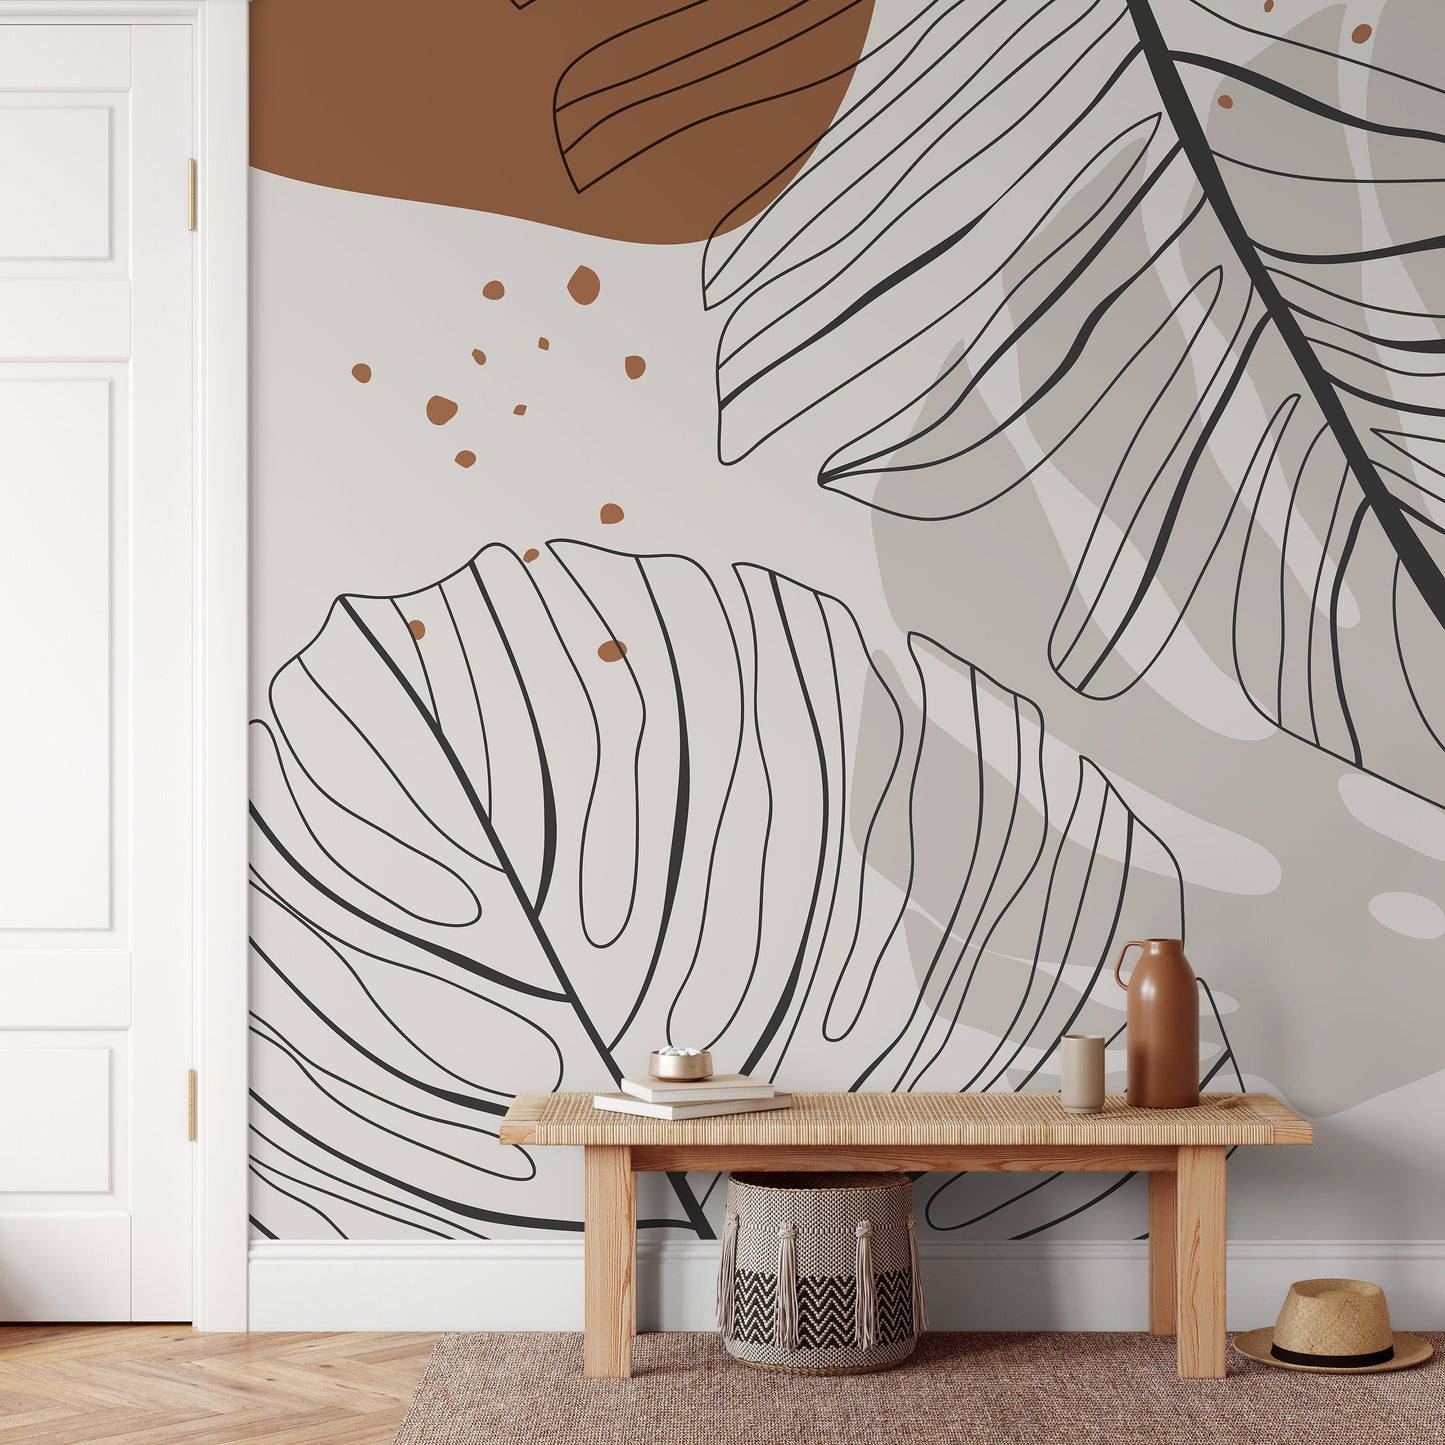 Temporary Leaves Mural Removable Wallpaper Wall Decor Home Decor Wall Art Printable Wall Art Room Decor Wall Prints Wall Hanging - B952